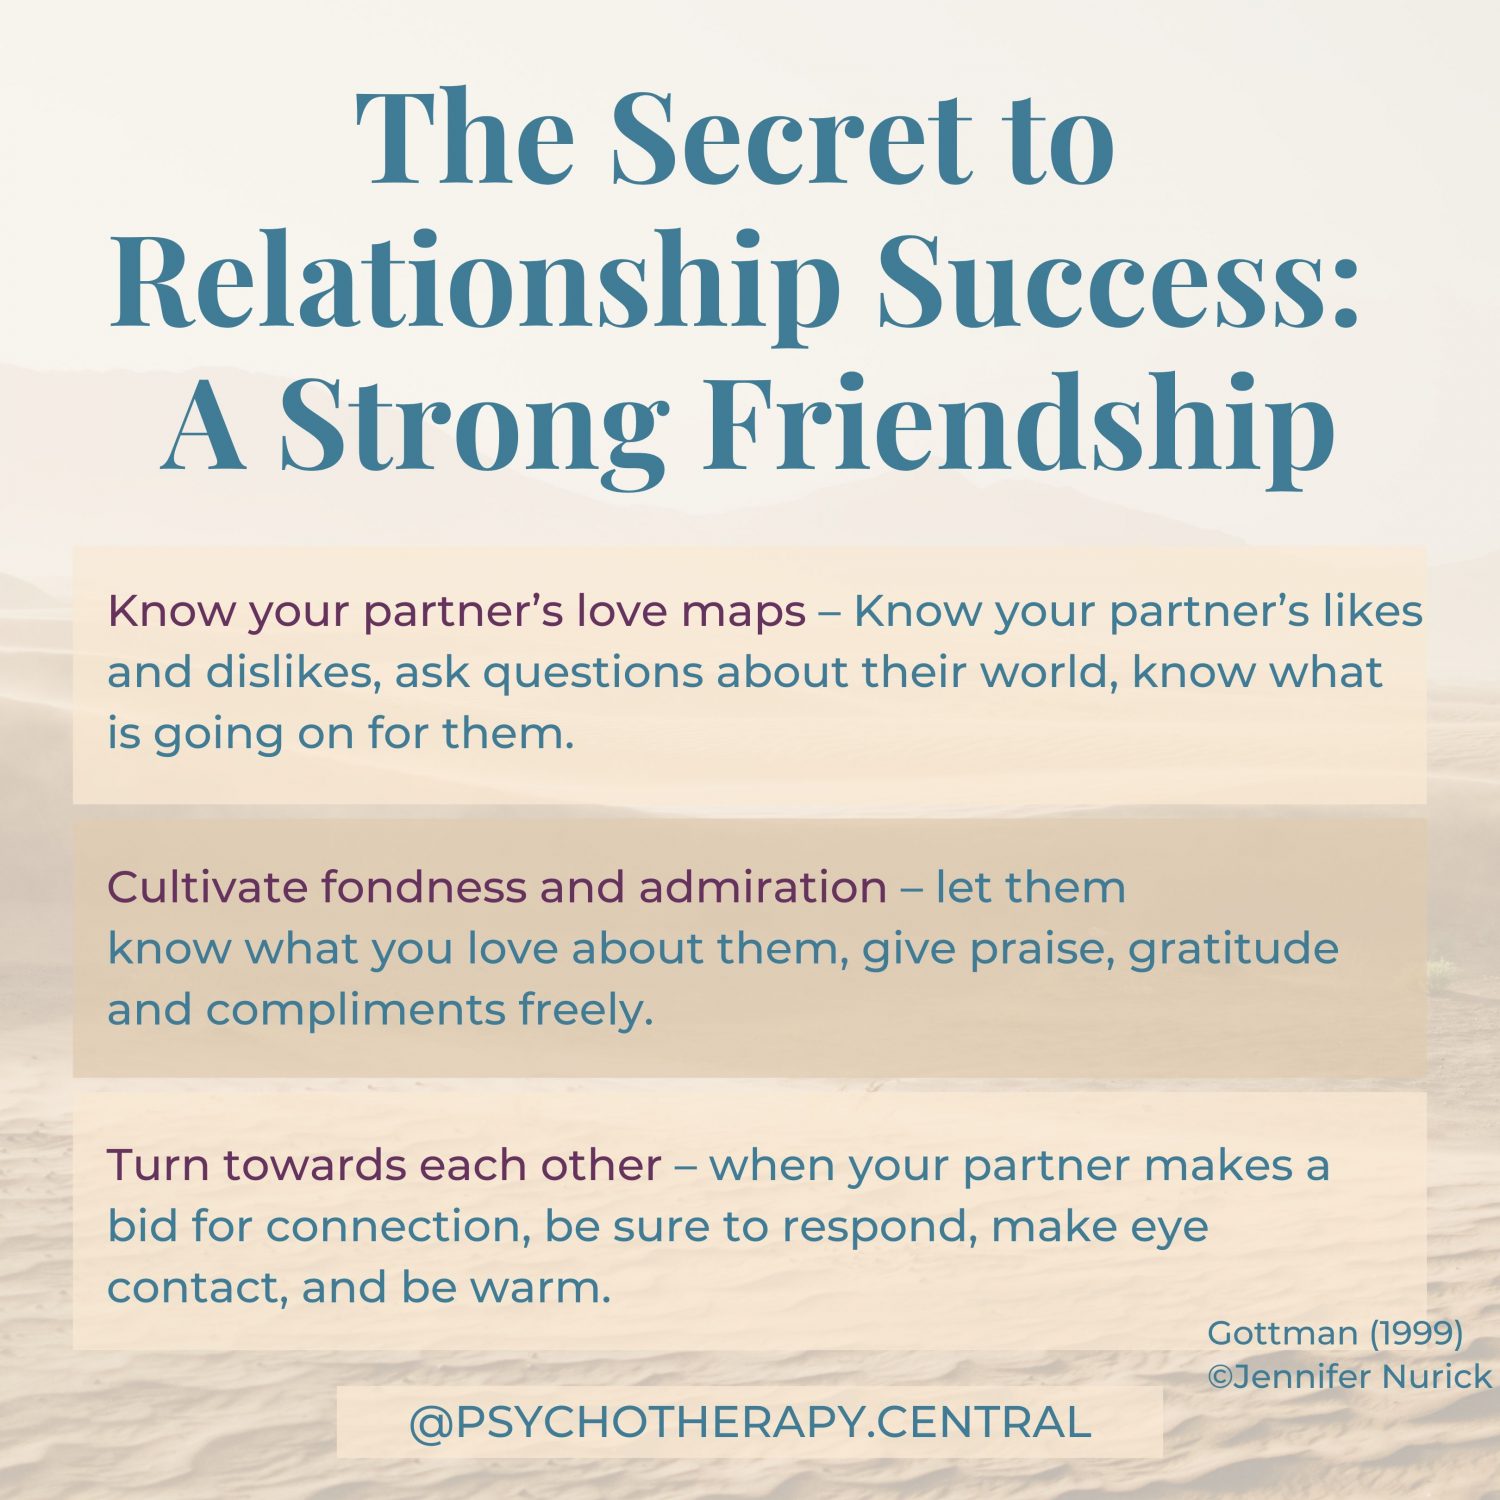 The secret to relationship success A strong friendship. Know your partner’s love maps – Know your partner’s likes and dislikes, ask questions about their world, know what is going on for them Cultivate fondness and admiration – let them know what you love about them, give compliments freely and give praise and gratitude. Turn towards each other – when your partner makes a bid for connection, be sure to respond, make eye contact, be warm.